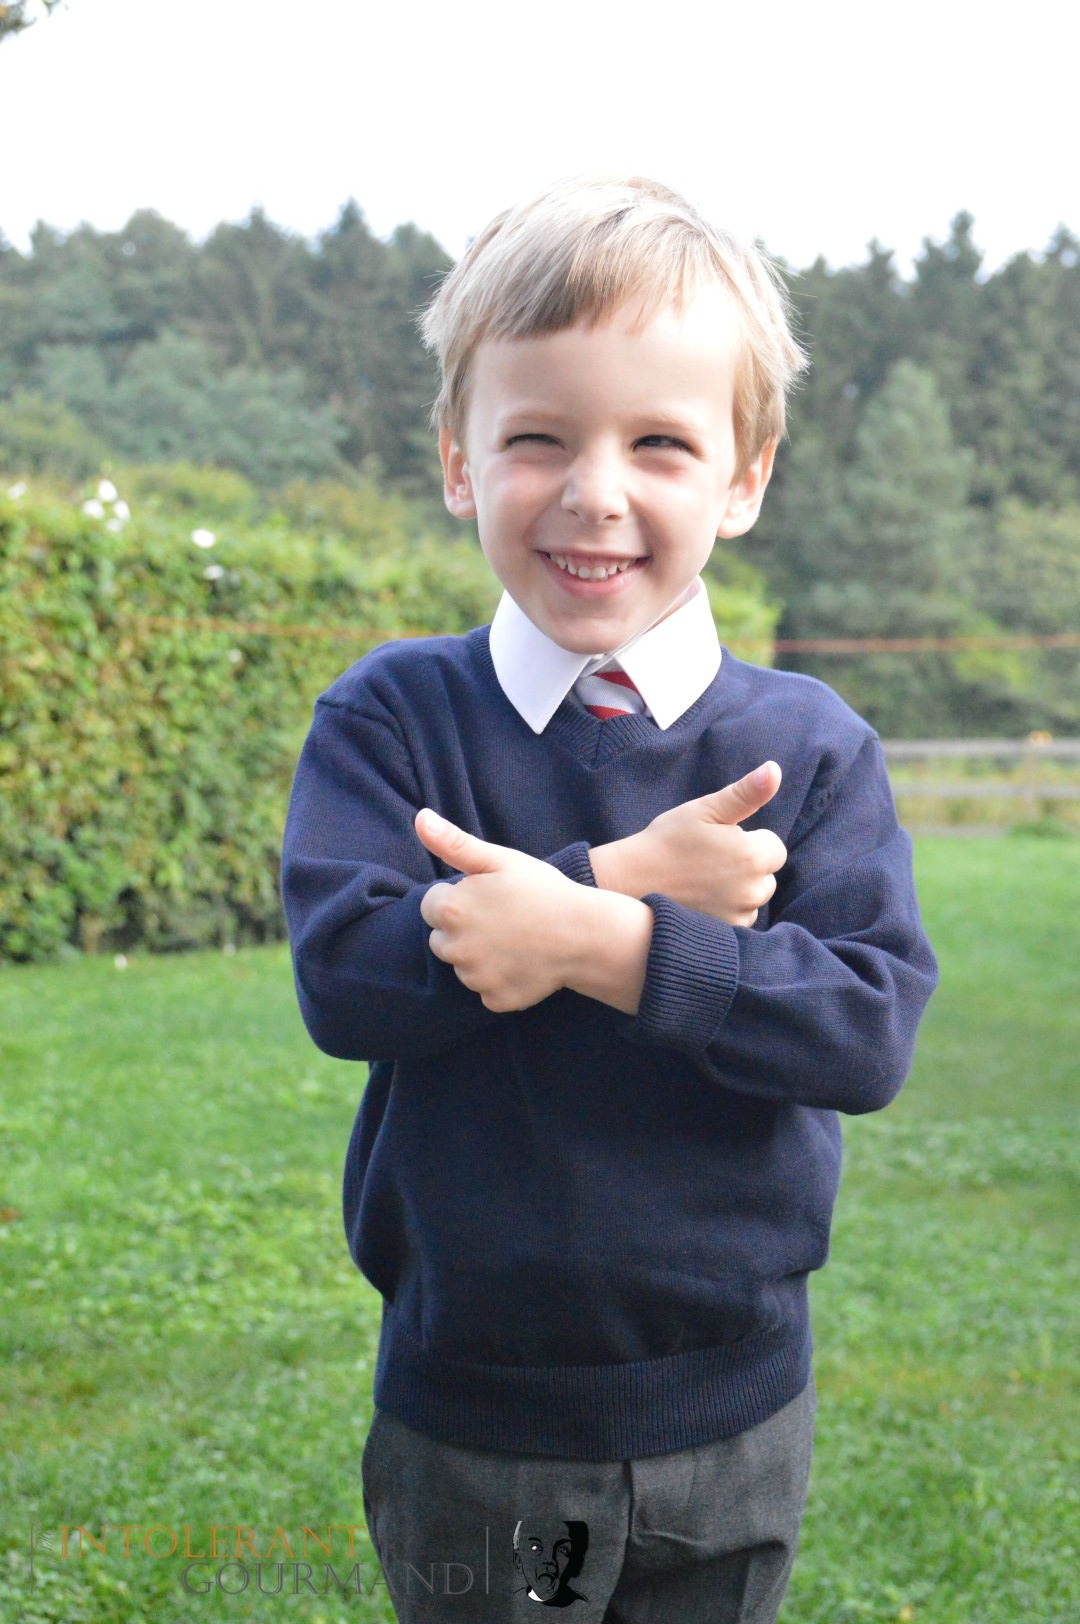 Callum 1st day at school  - starting school with multiple severe allergies. Top tips on preparing a school and child for dealing with multiple severe allergies successfully! www.intolerantgourmand.com